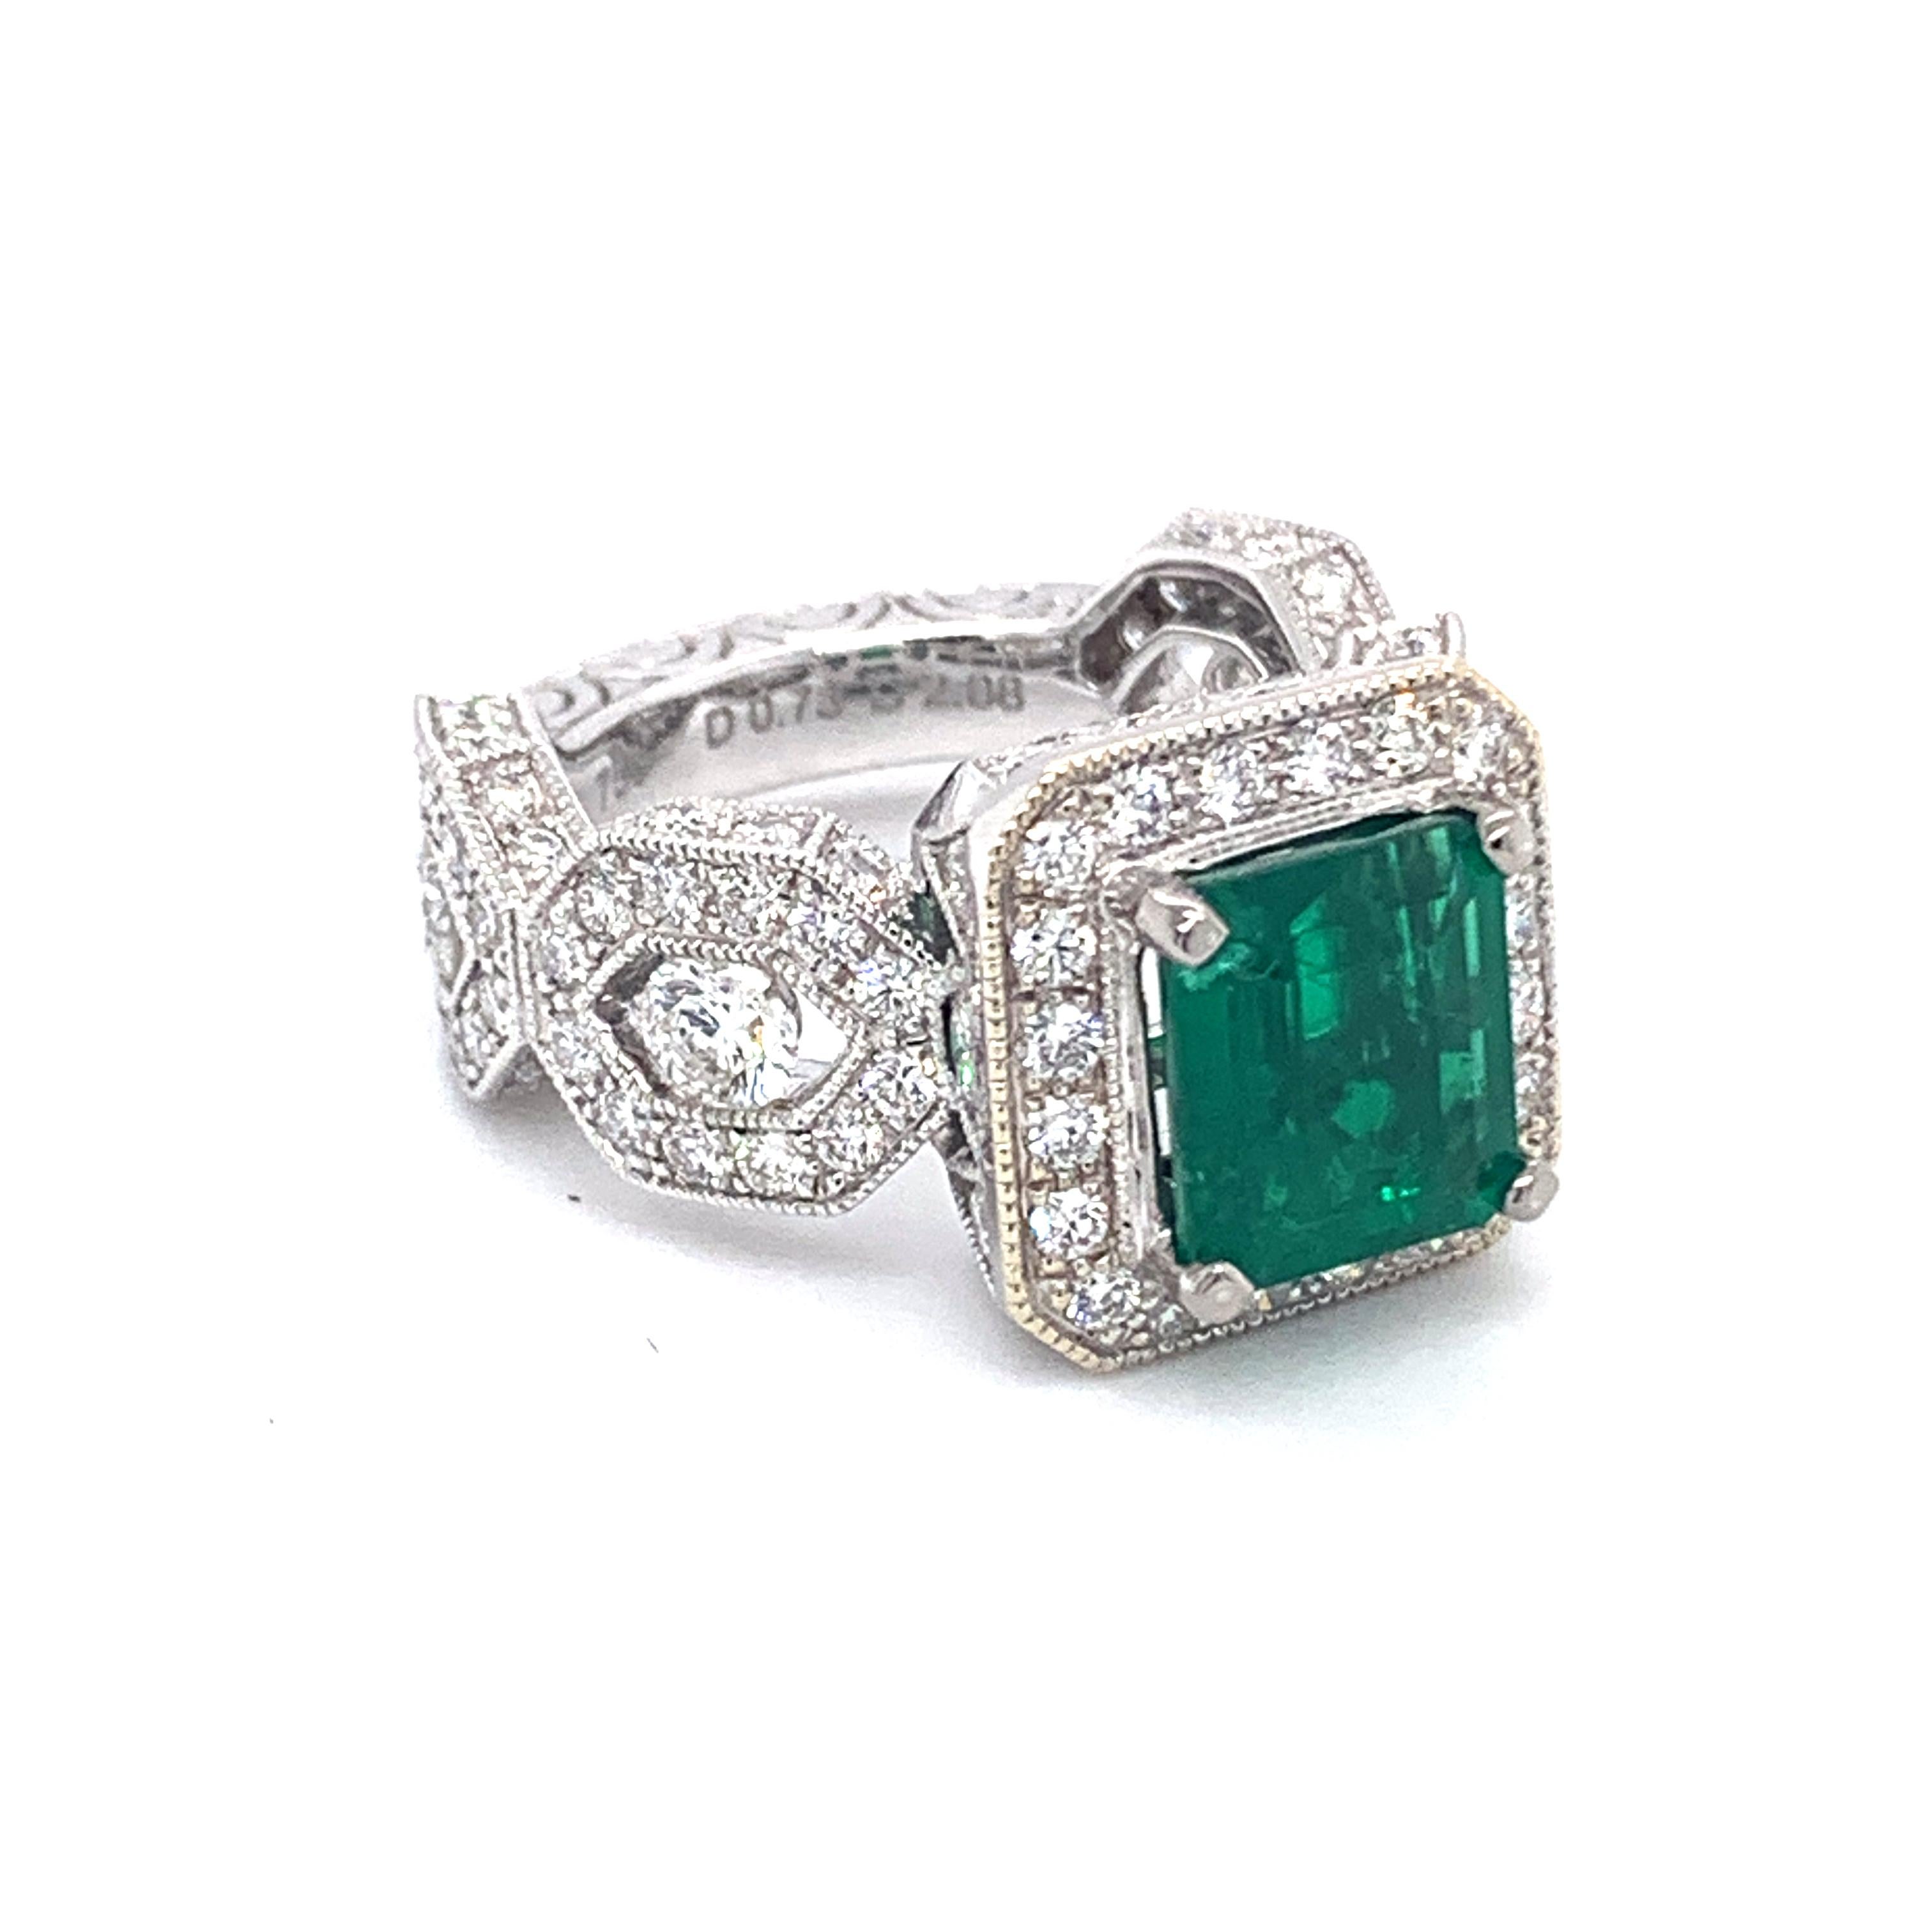 Stunning solid Platinum 2.40 carat emerald engagement ring set with pave style diamonds 2.80 carat in weight FG color VS1 clarity